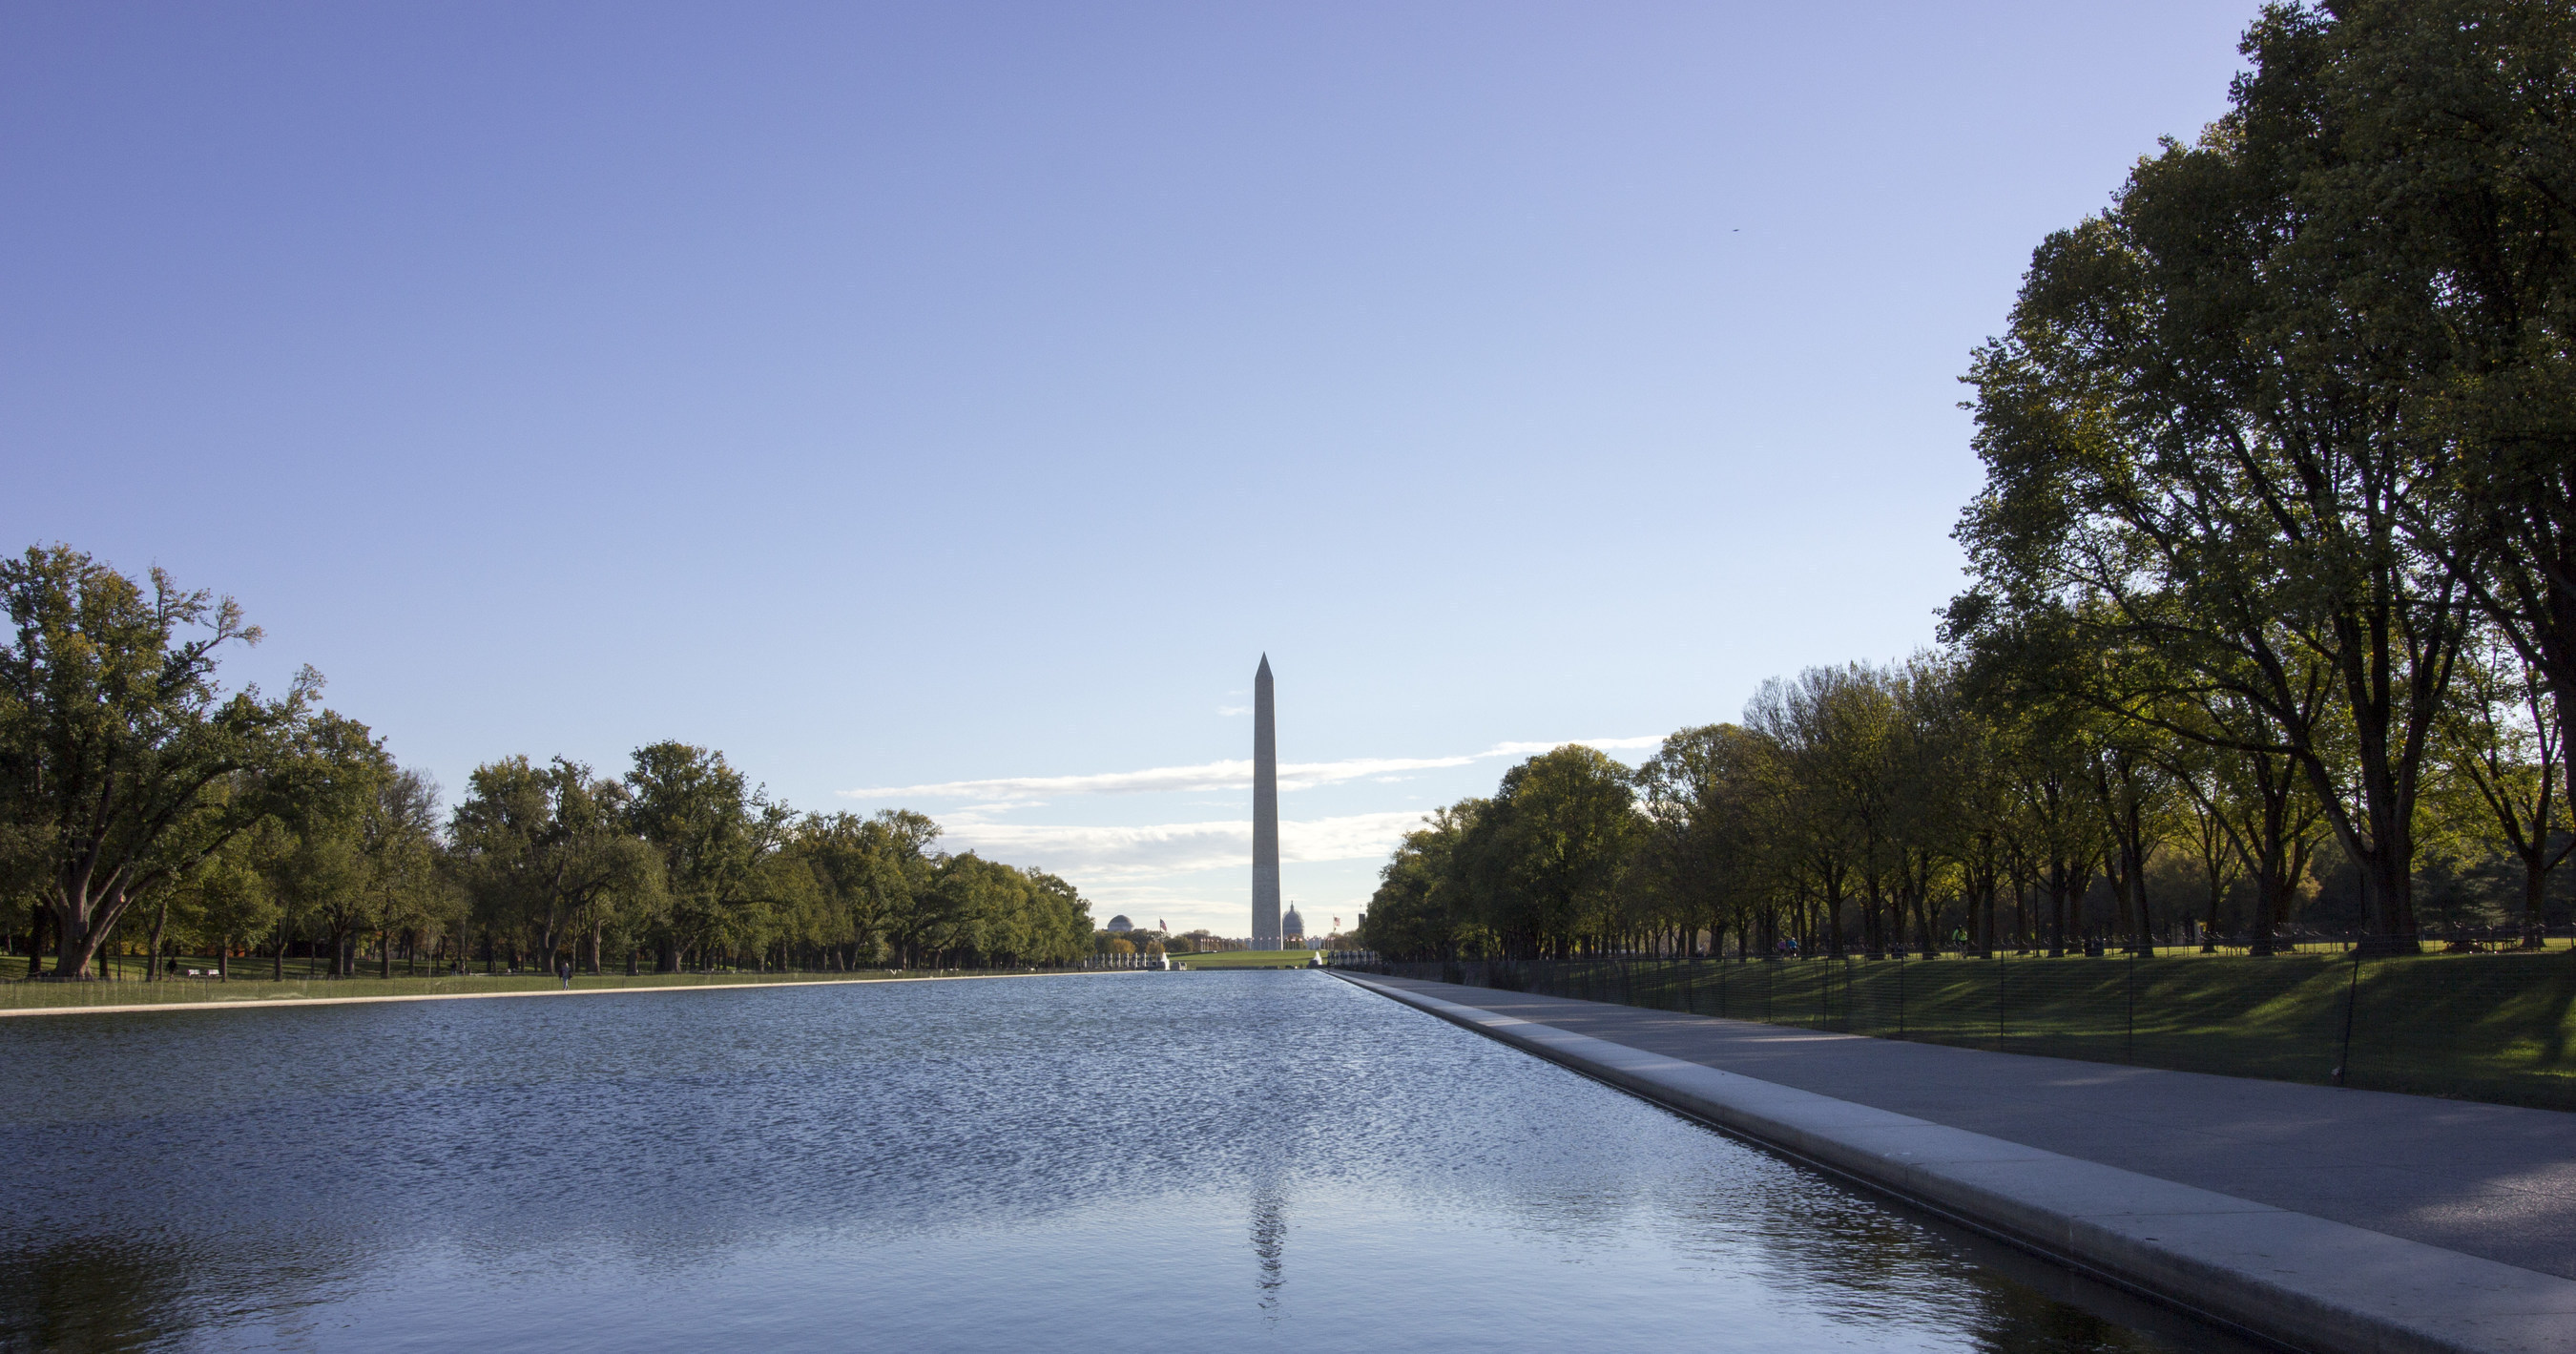 Newly renovated Washington Monument and Lincoln Memorial Reflecting Pool